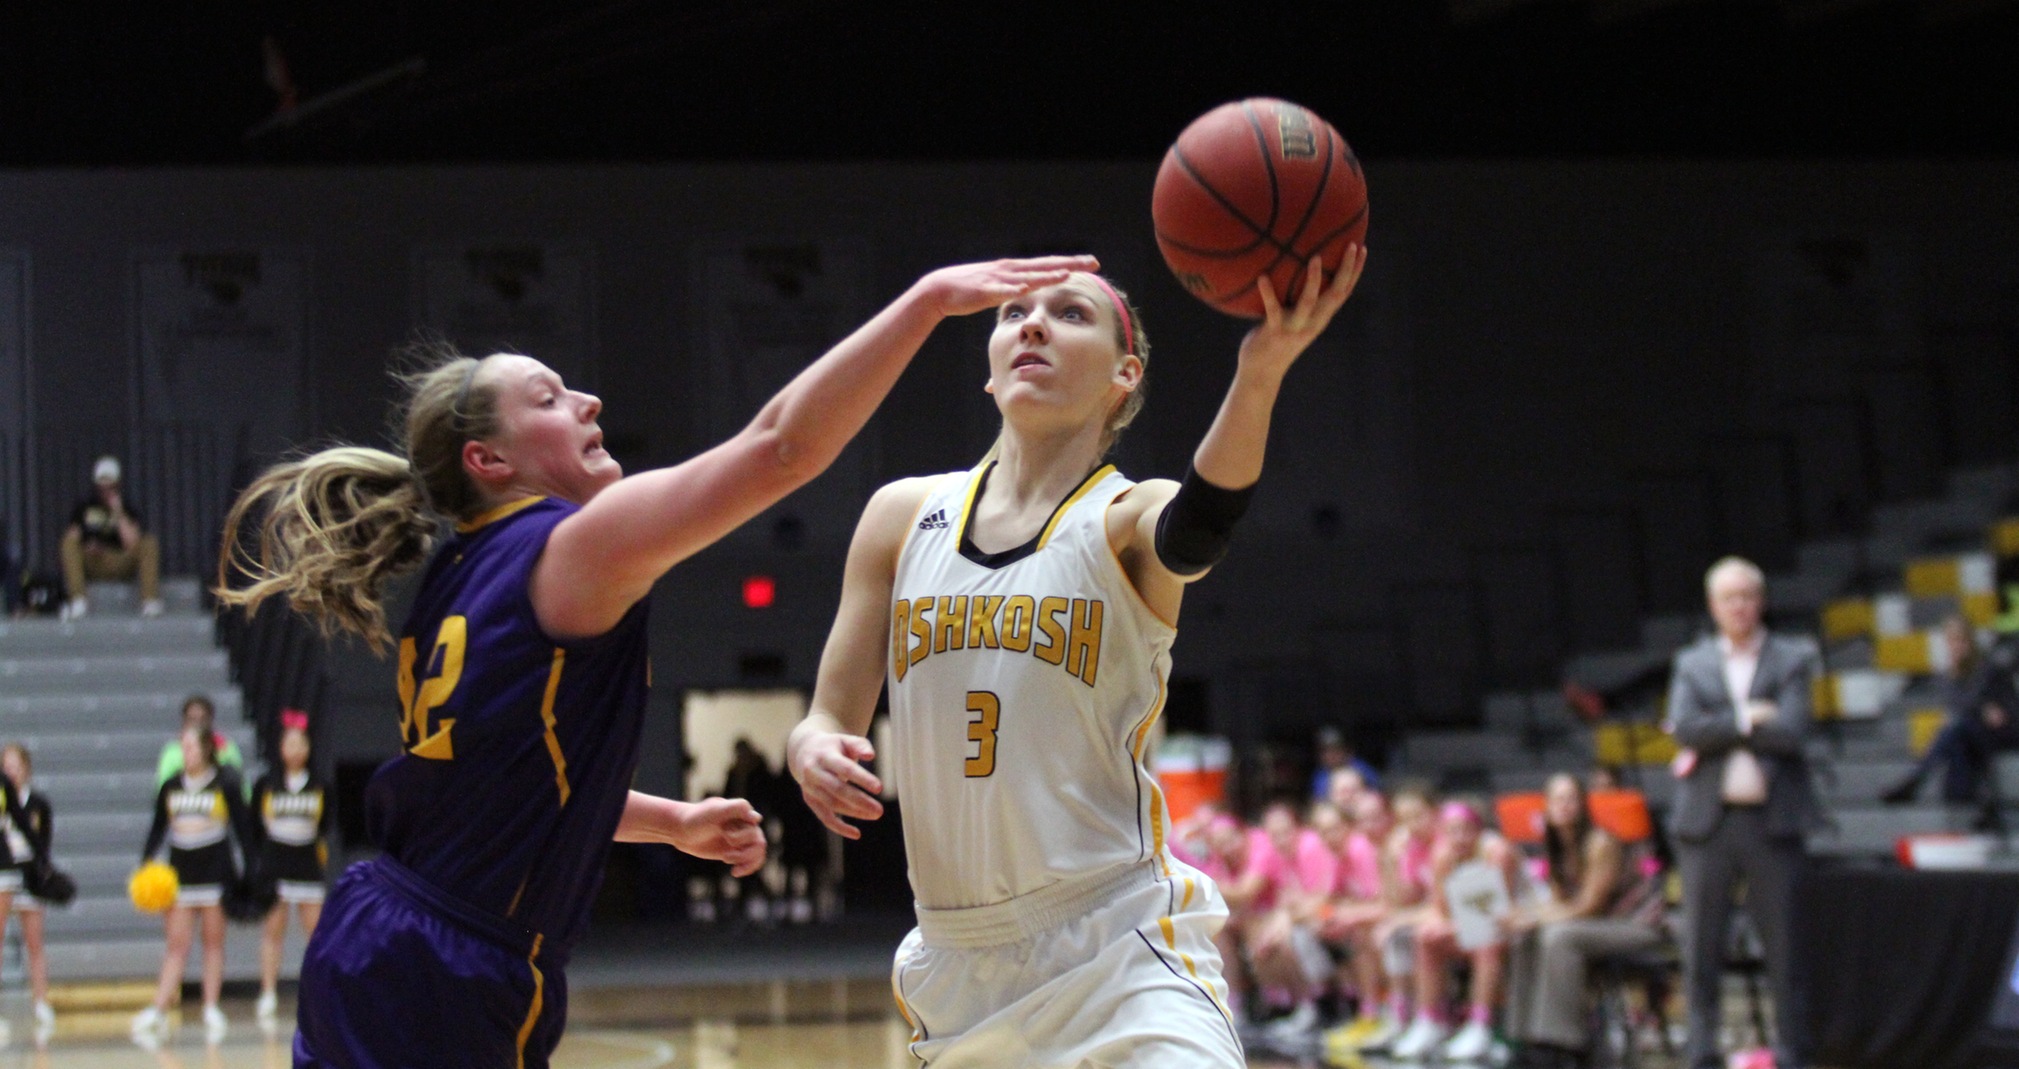 Jaimee Pitt scored 10 points and blocked two shots against the Pointers.